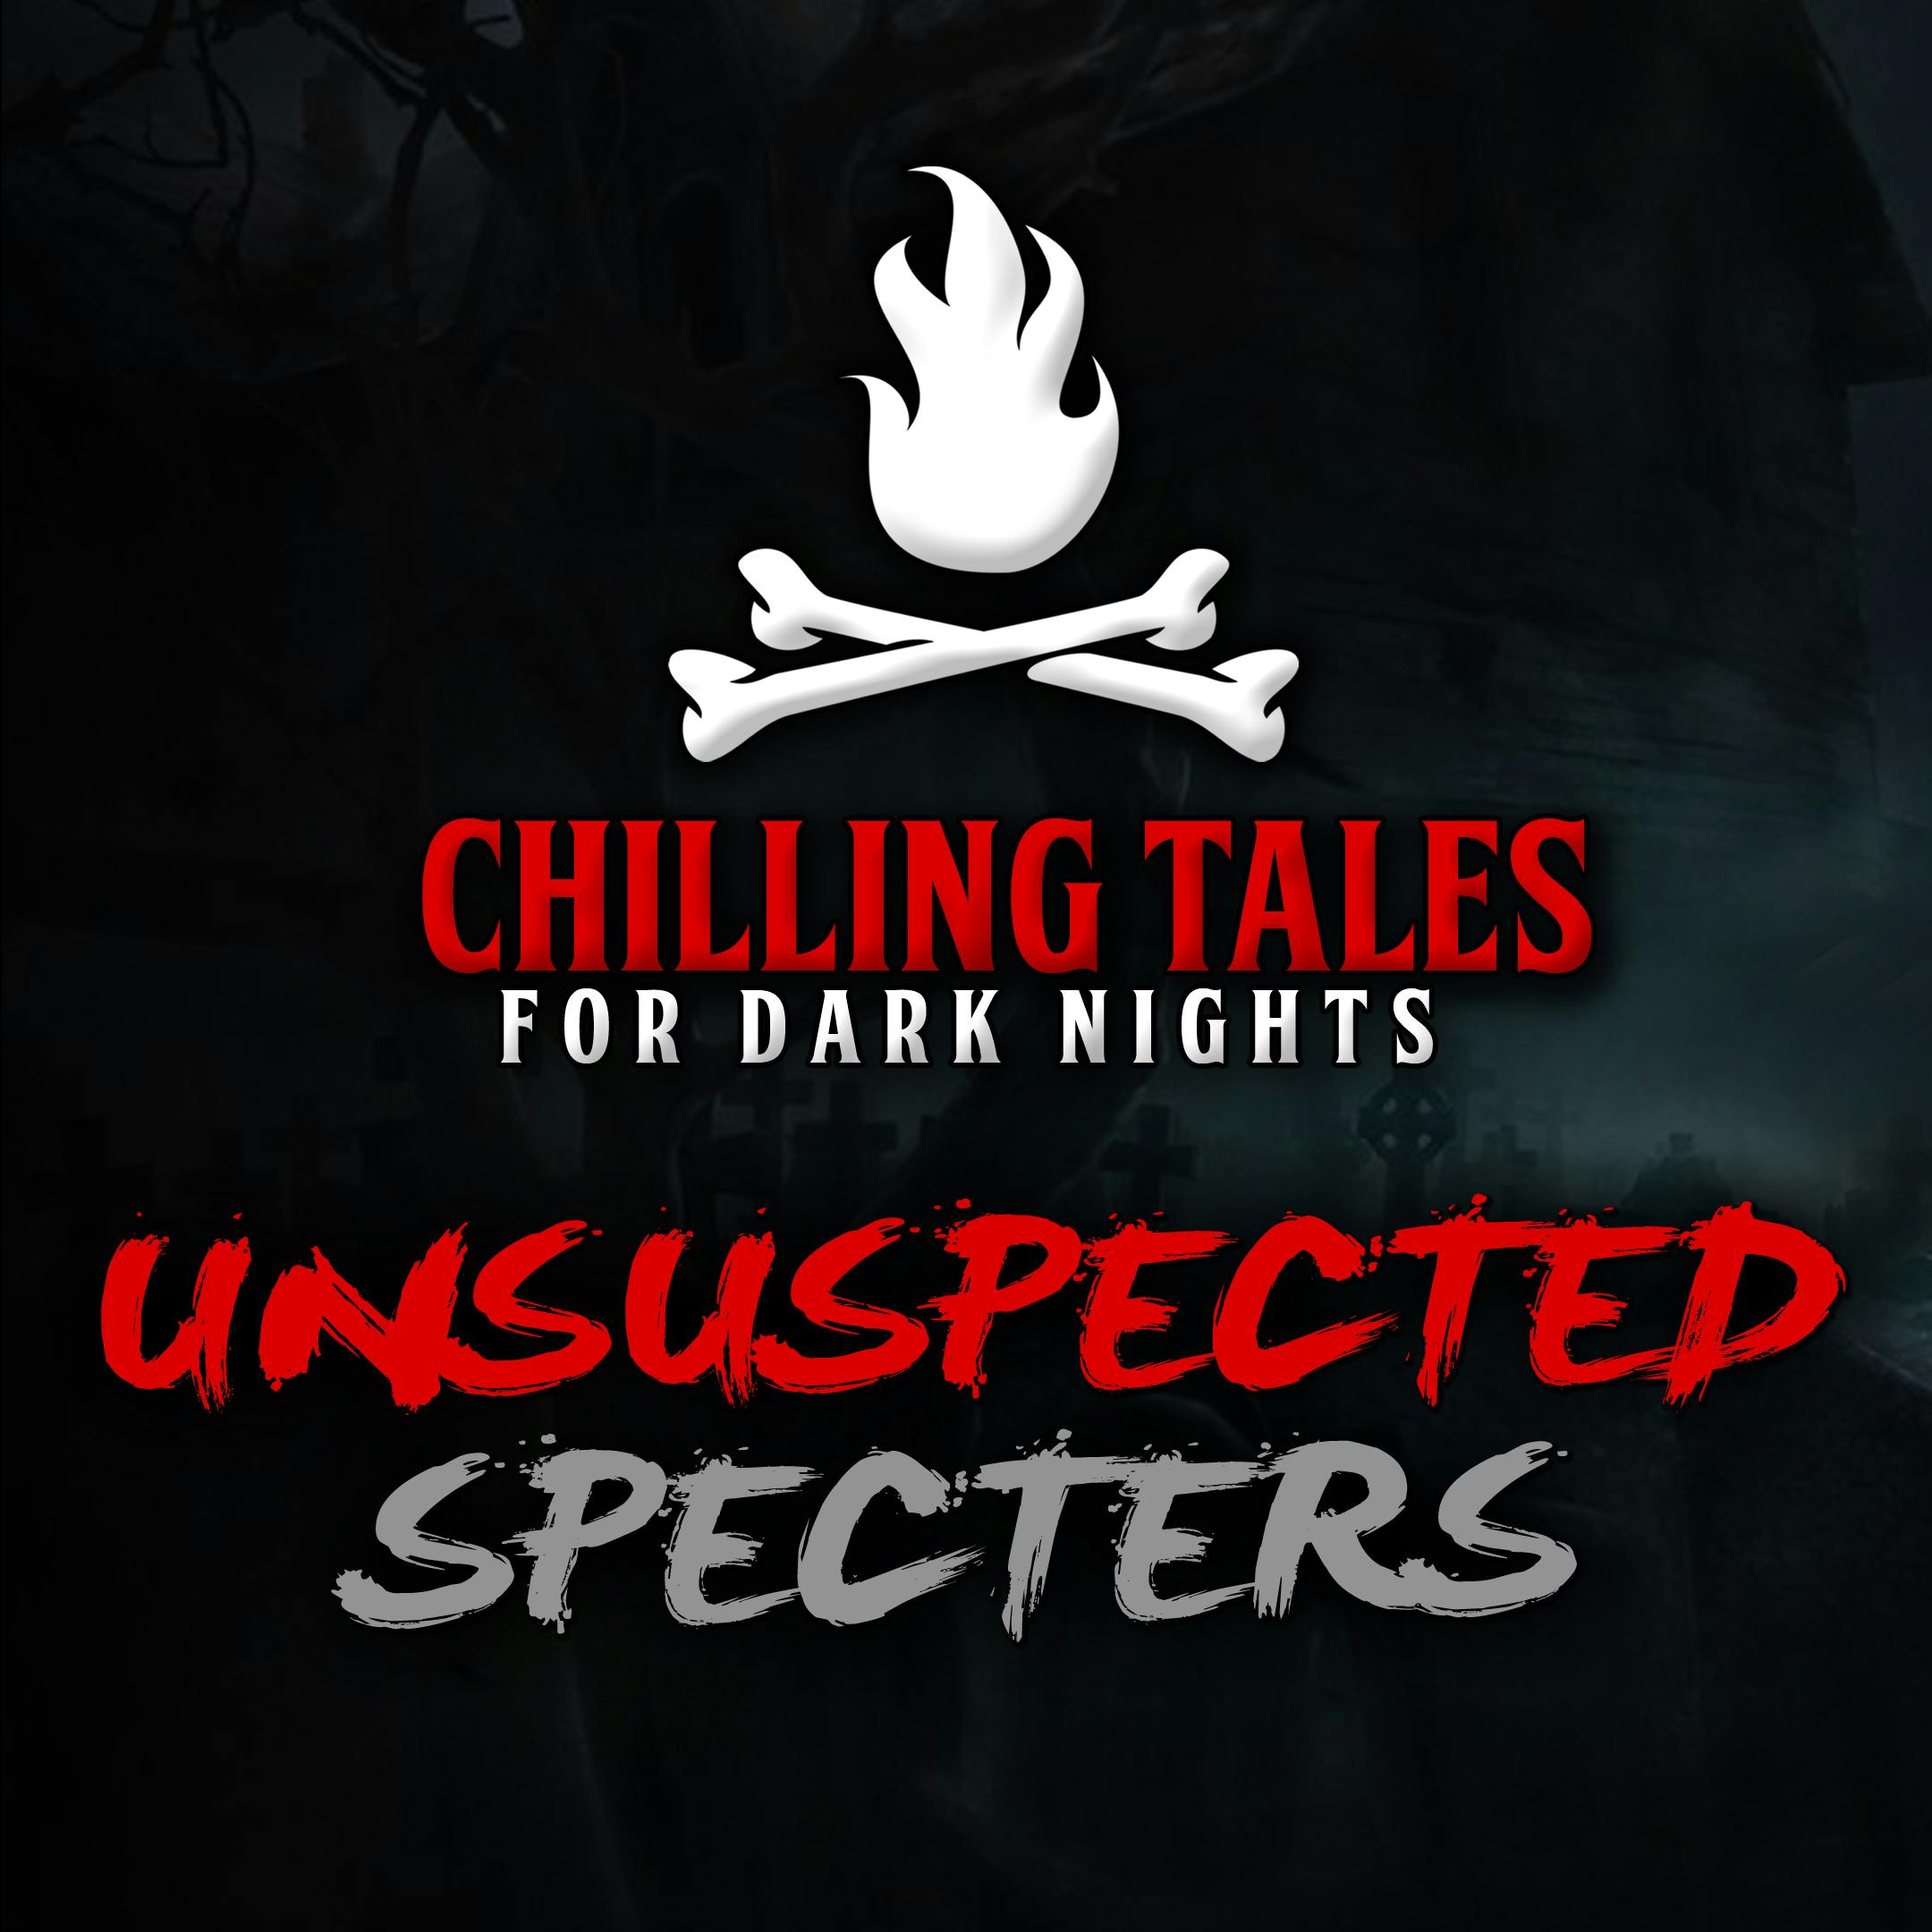 83: Unsuspected Specters – Chilling Tales for Dark Nights